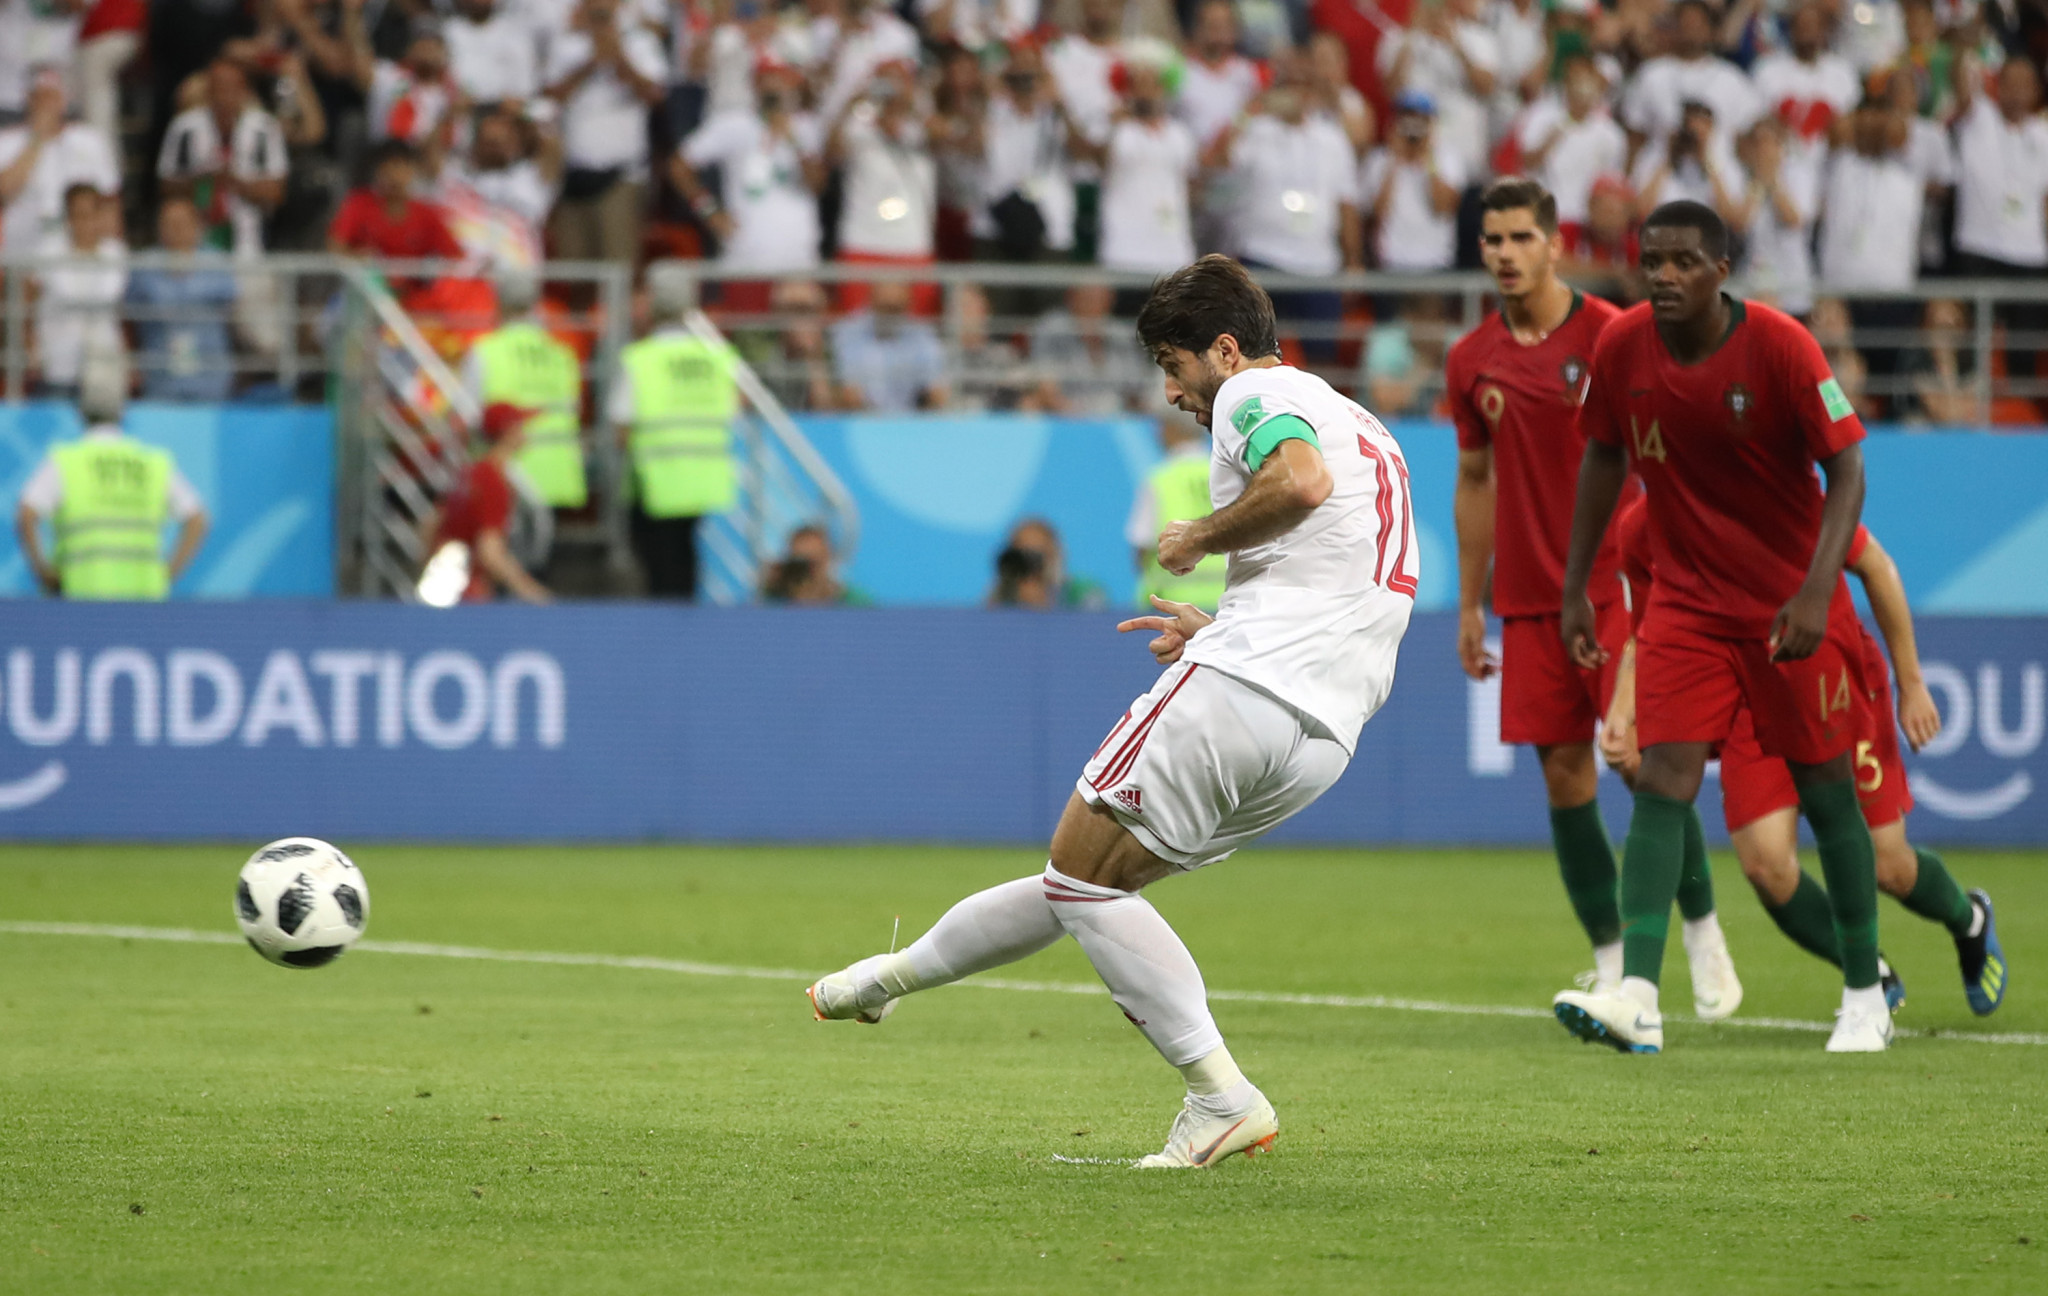 Karim Ansarifard's spot-kick three minutes into stoppage time earned Iran a point and condemned Portugal to second place in a controversial end to Group B ©Getty Images